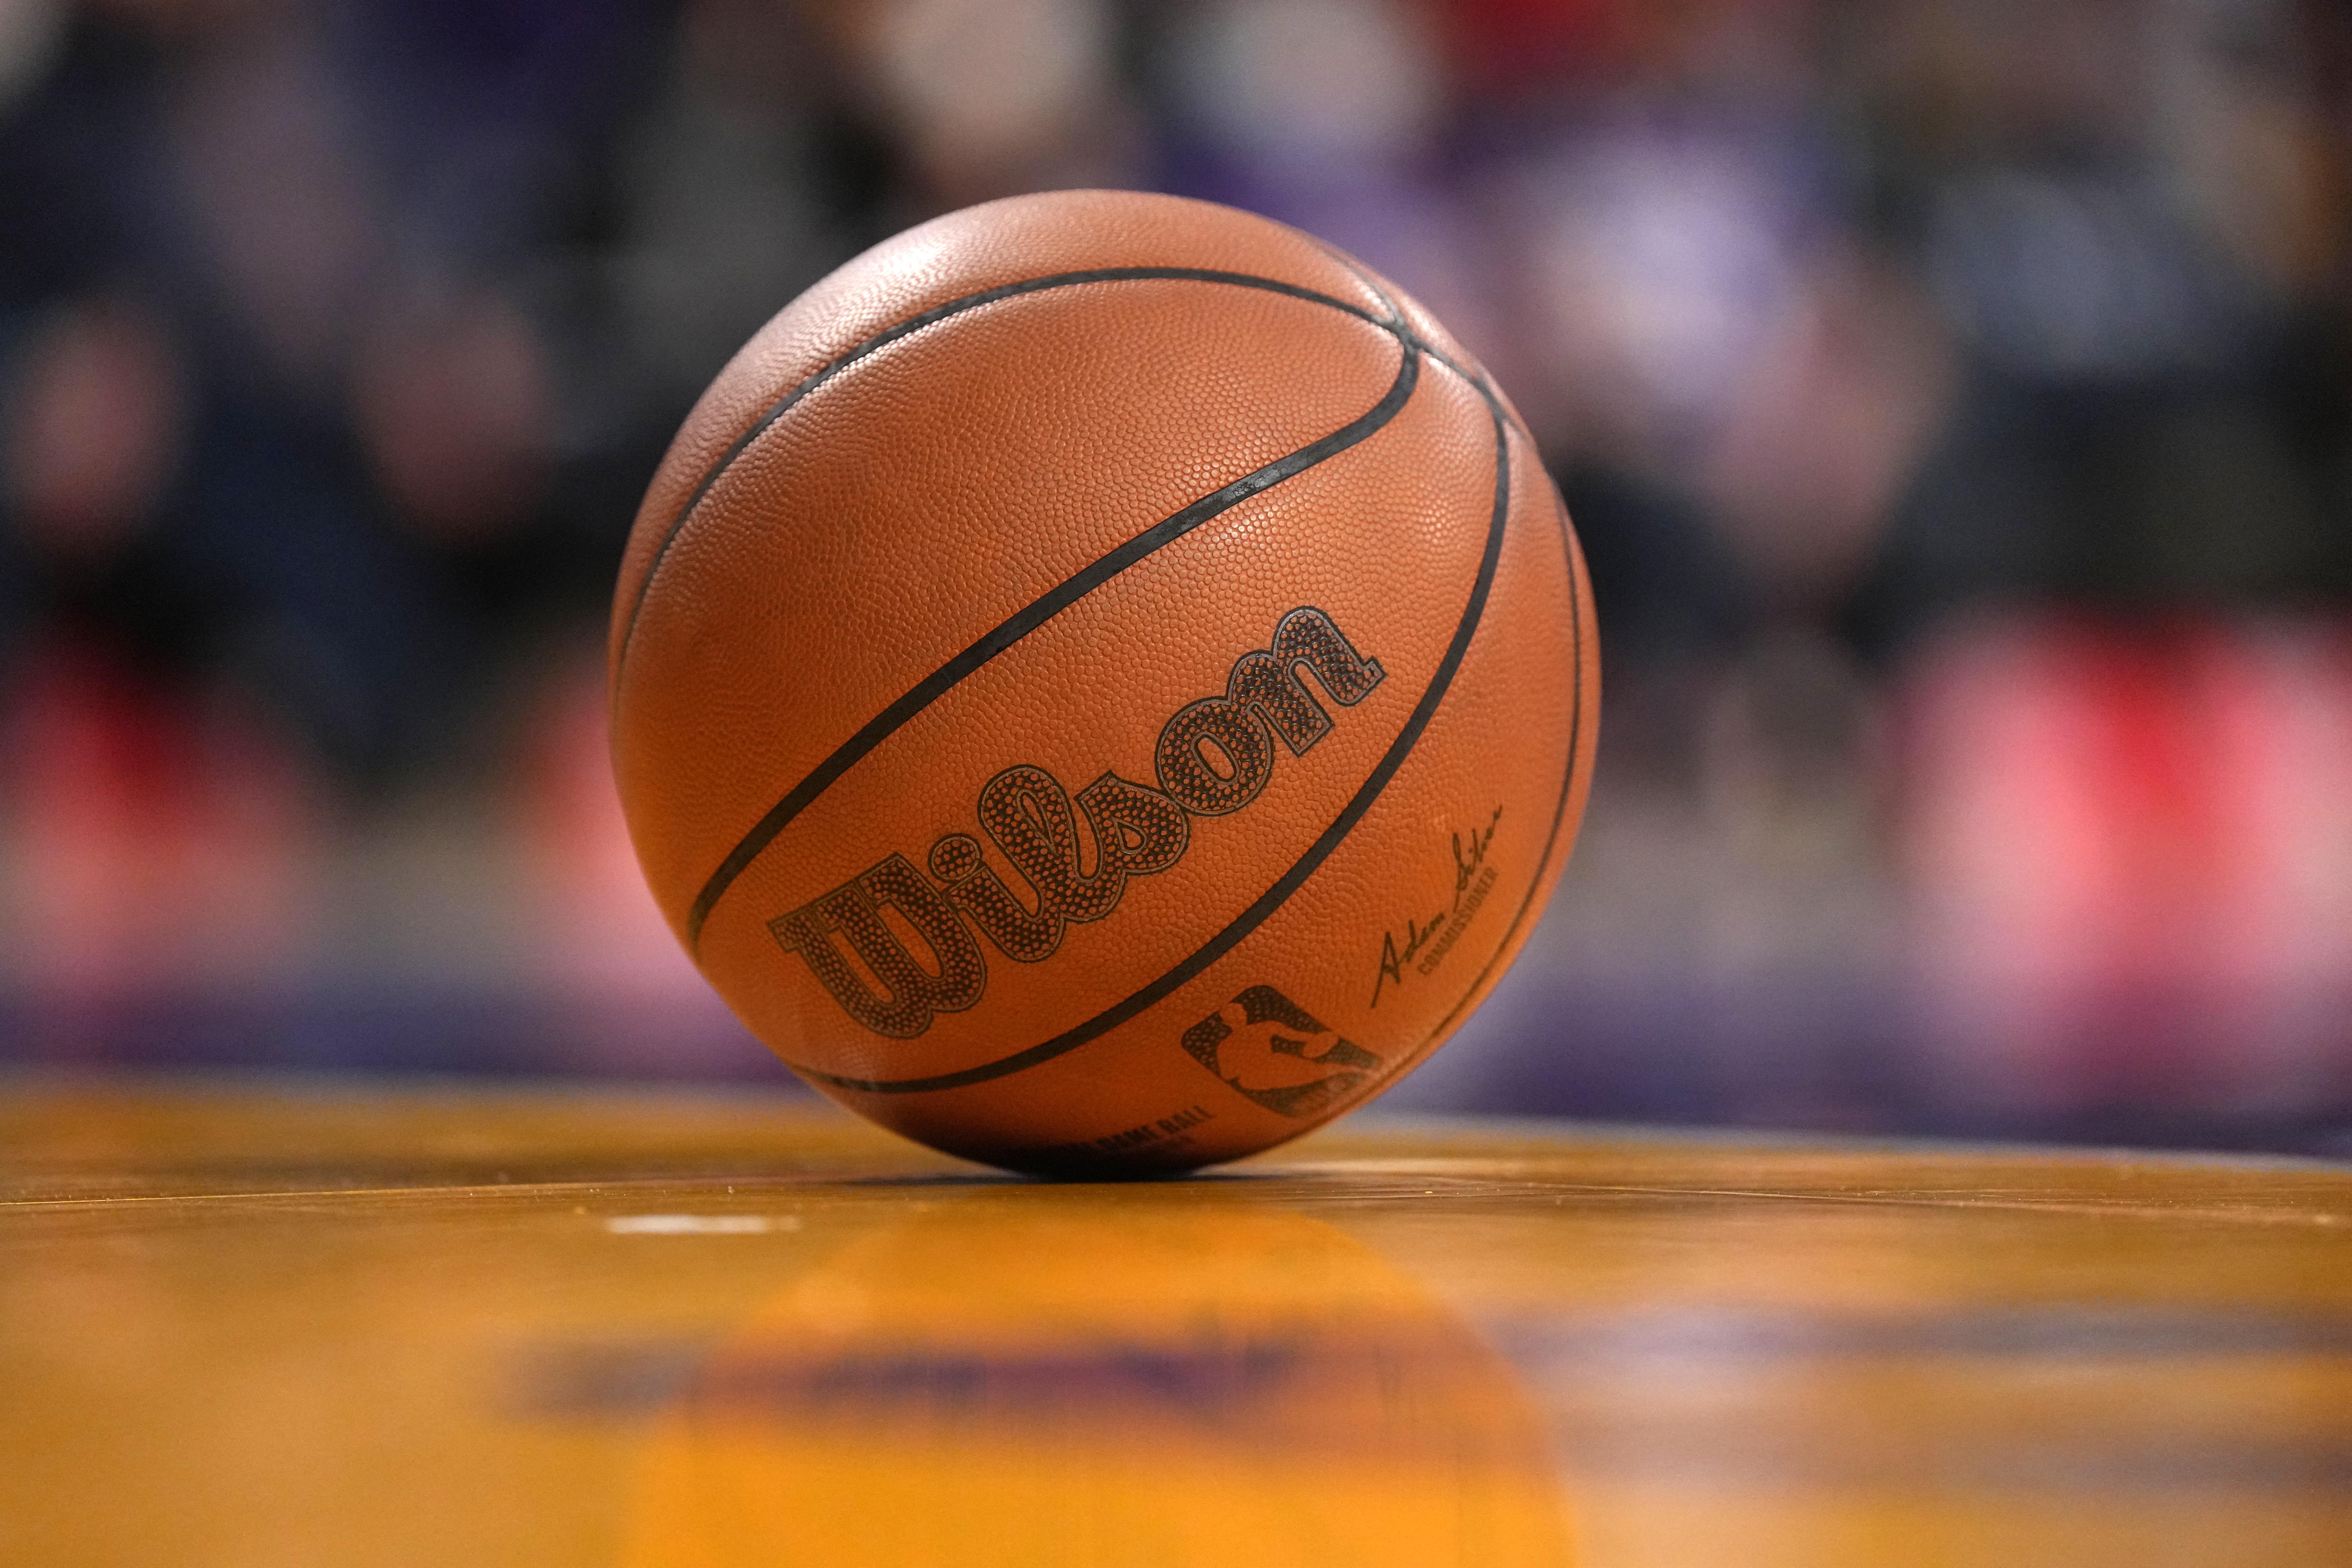 FILE PHOTO: A detailed view of a Wilson official NBA basketball on the court at Crypto.com Arena.